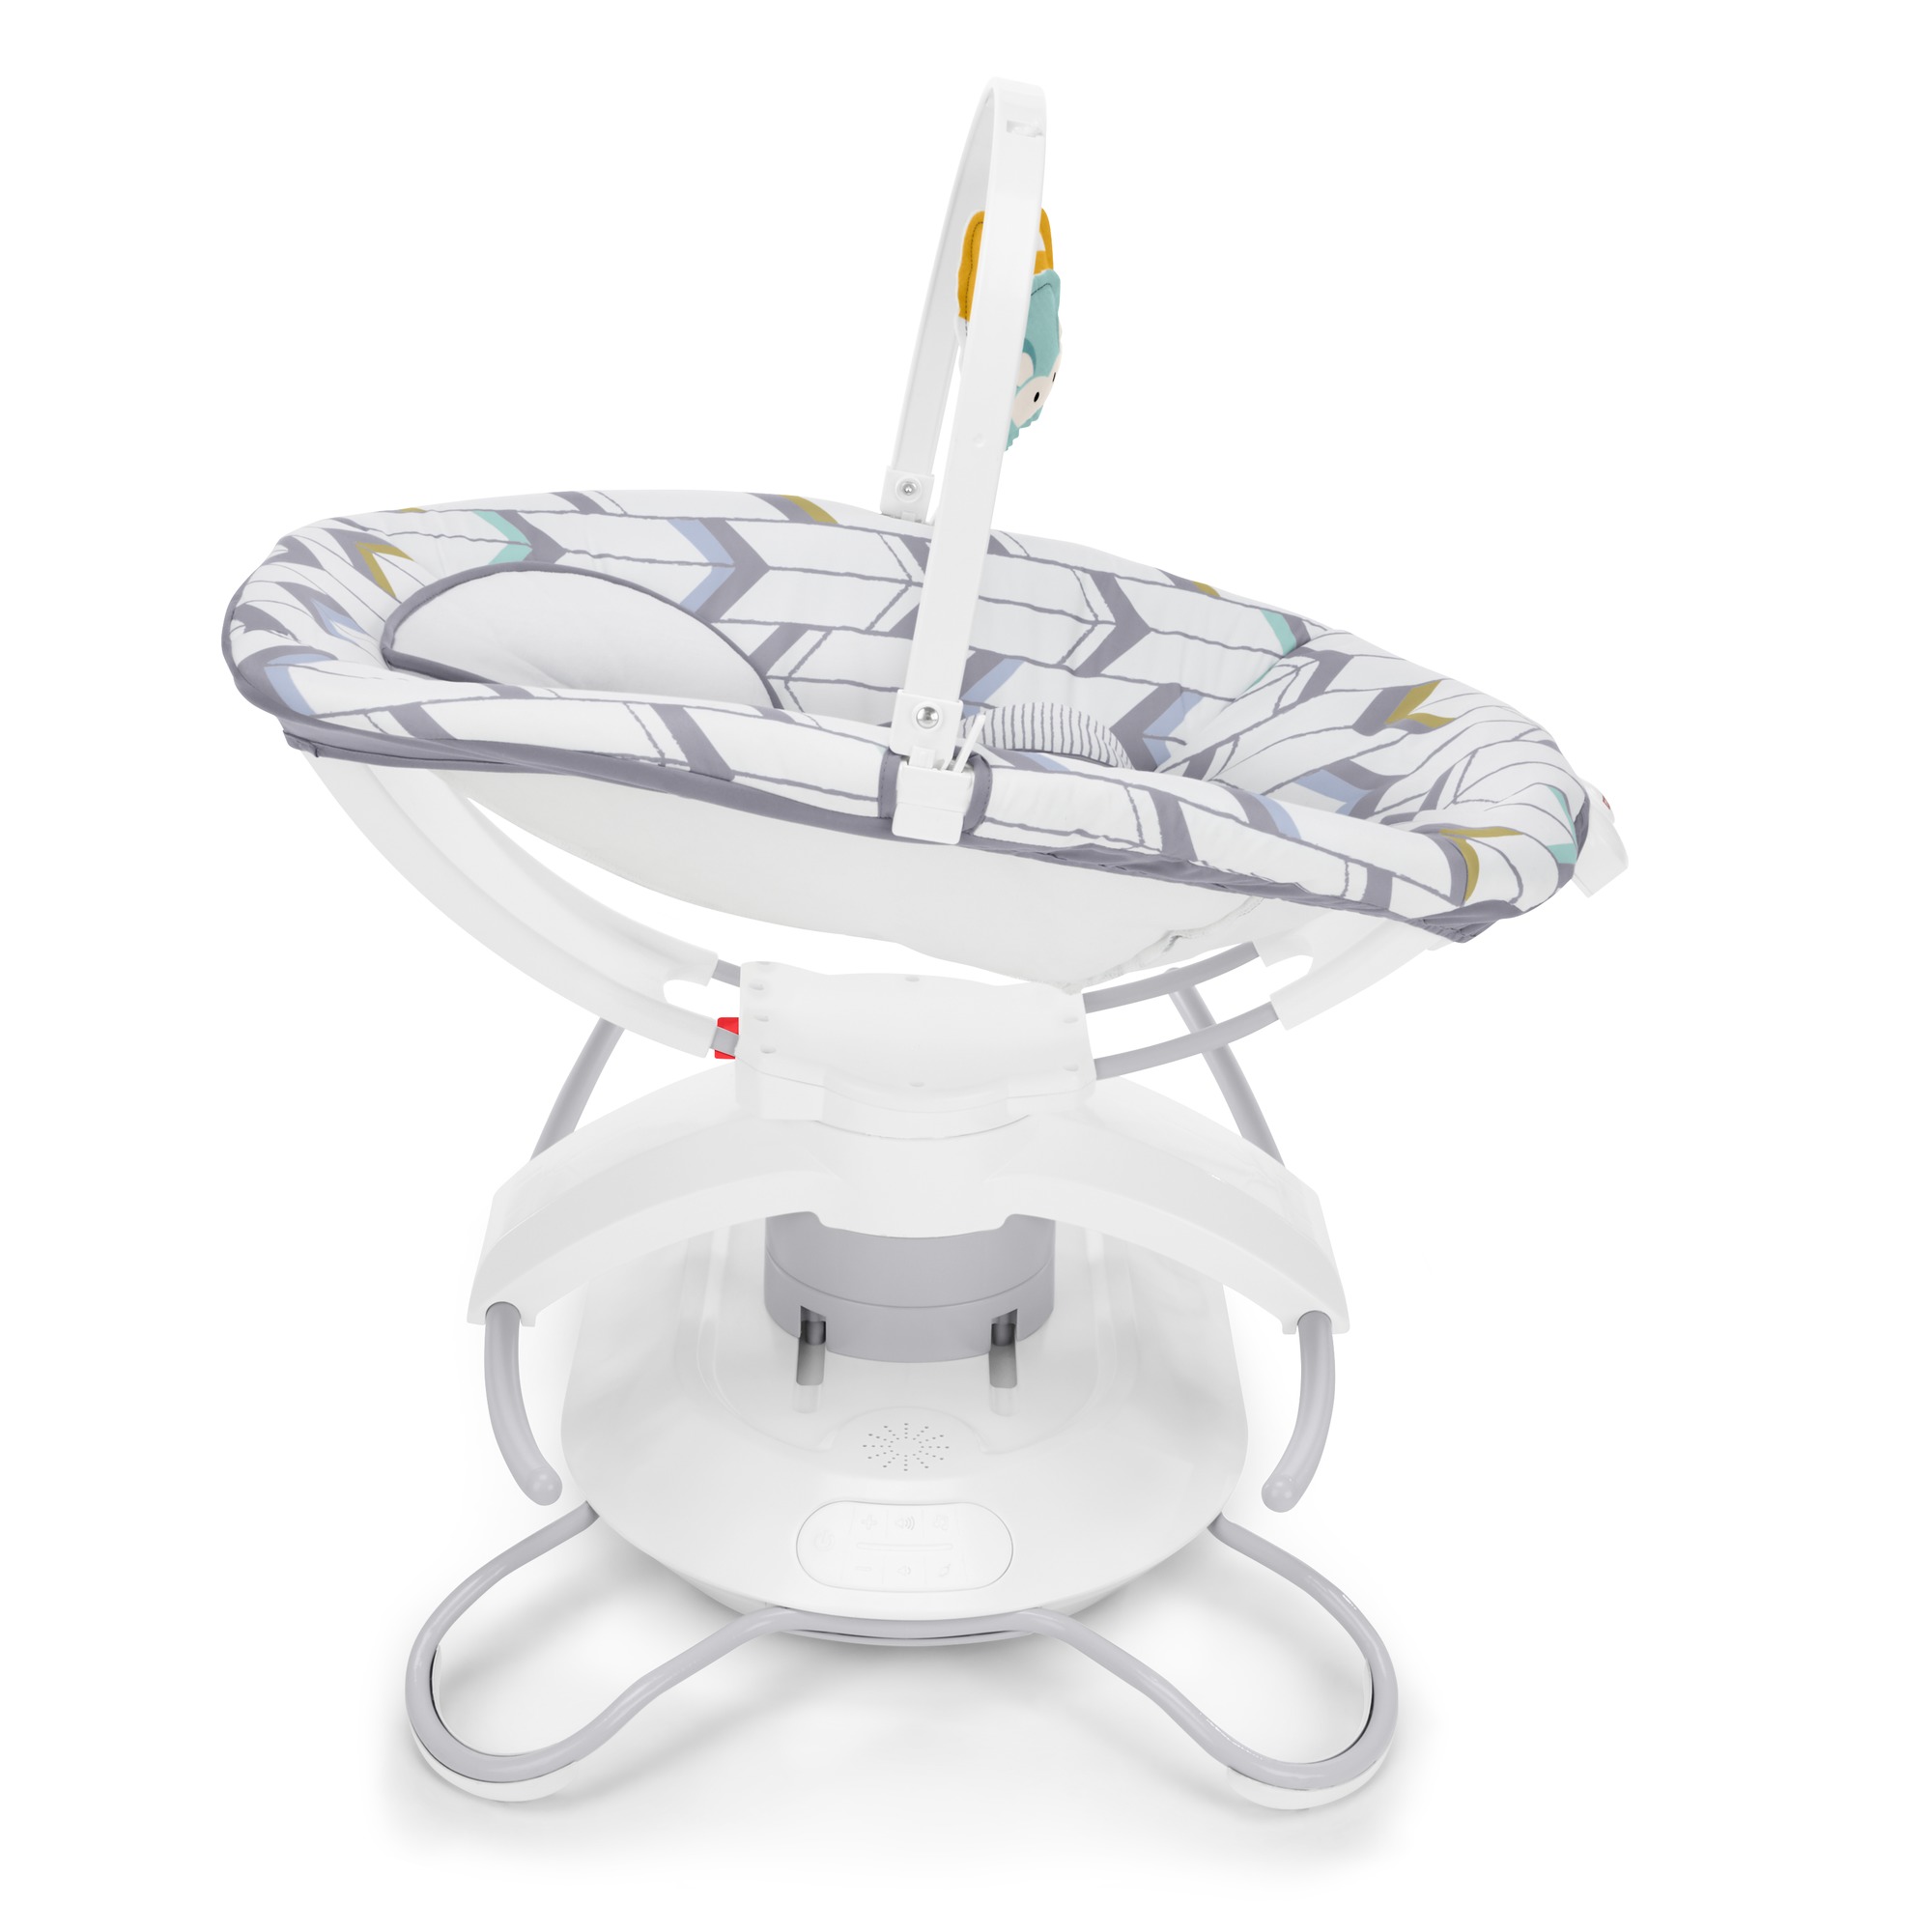 FisherPrice 2in1 Deluxe Soothe ‘n Play Glider Baby